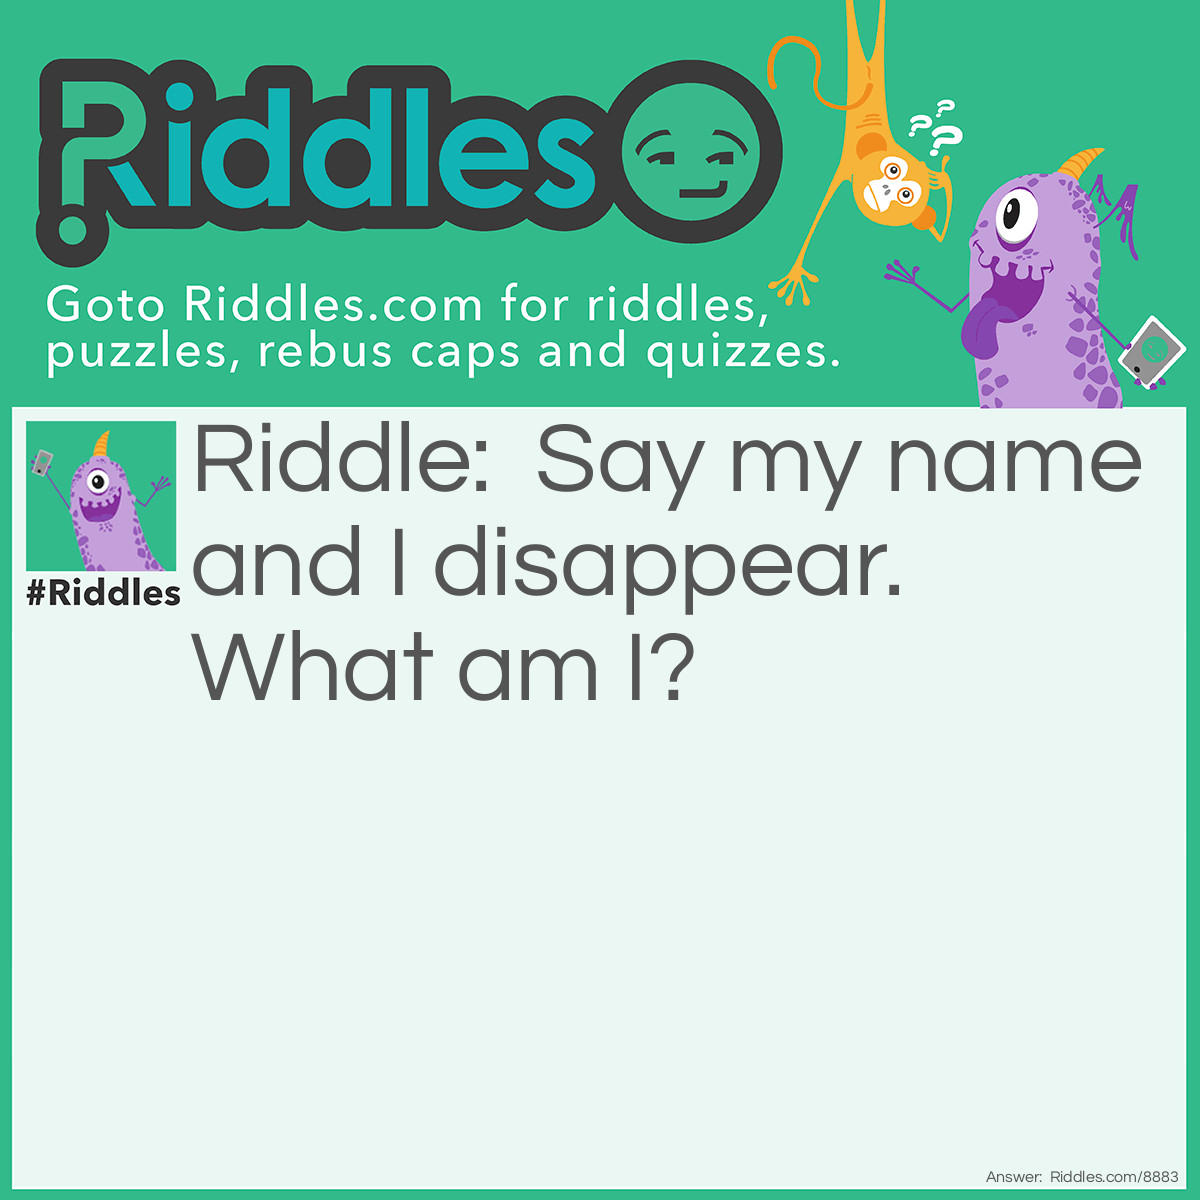 Riddle: Say my name and I disappear. What am I? Answer: Silence.